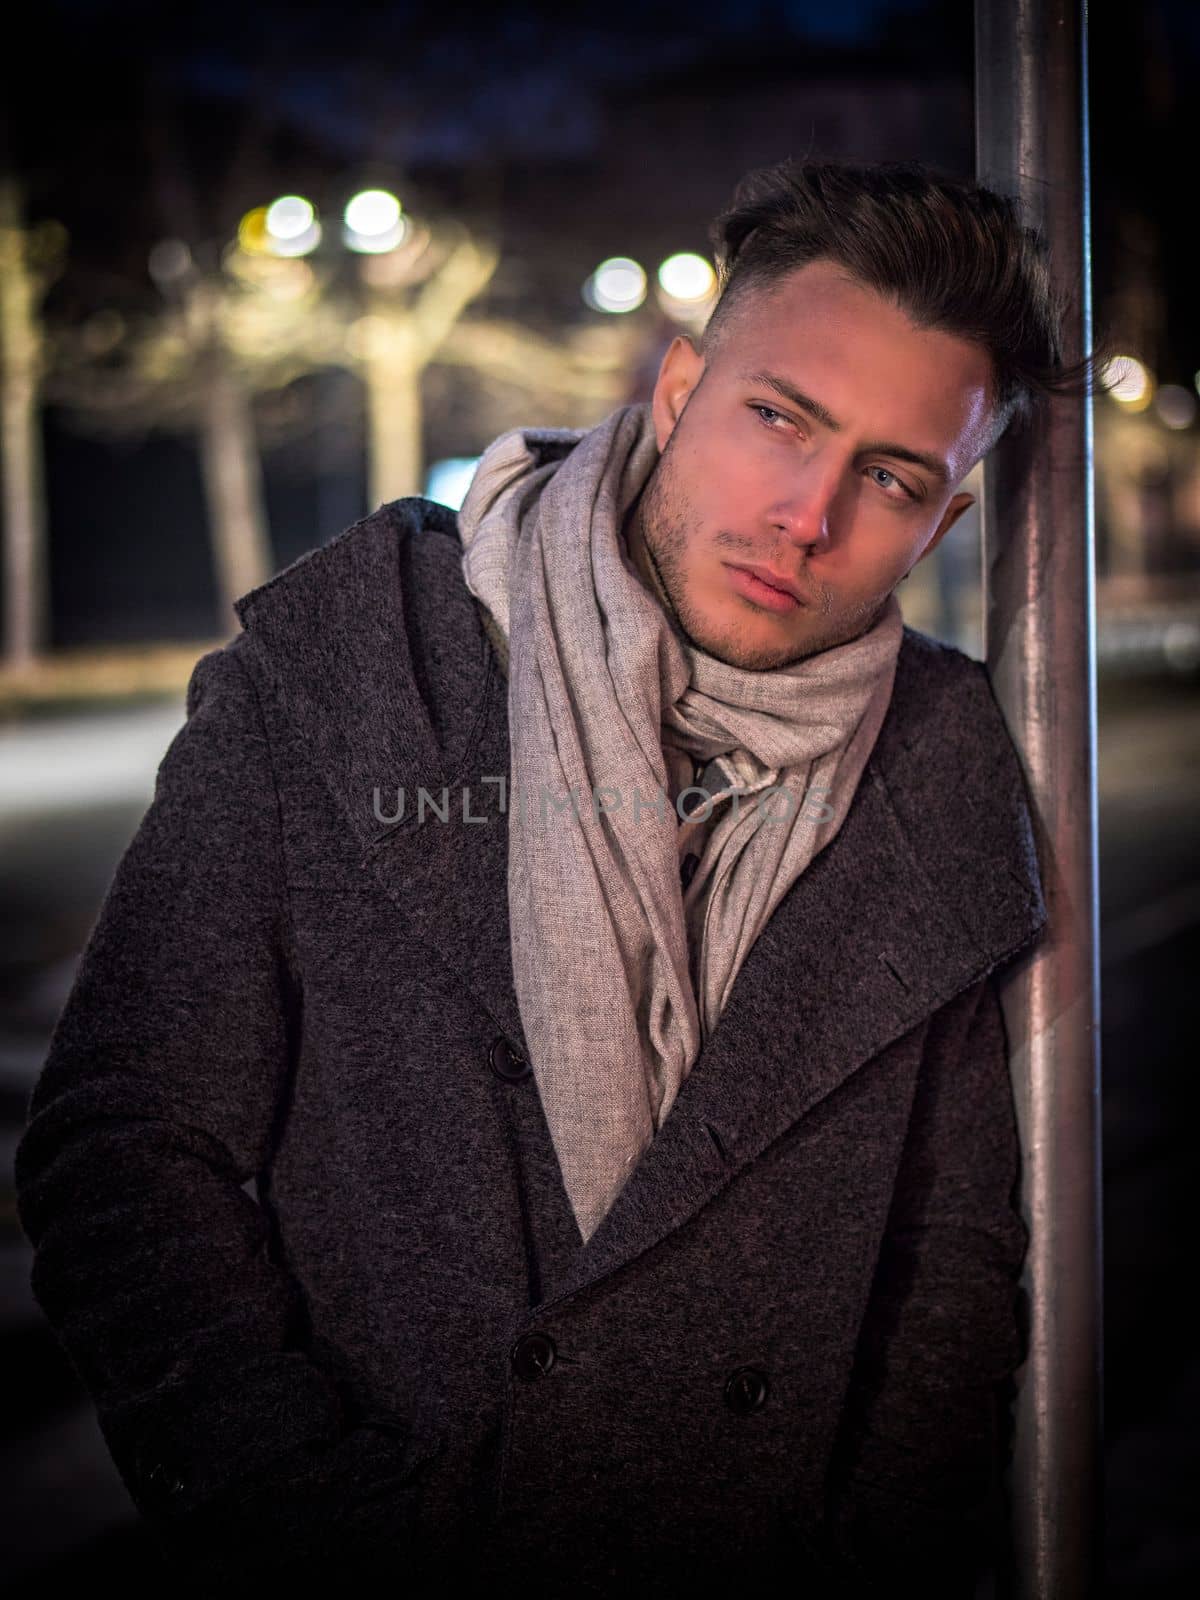 Handsome trendy young man, standing on a sidewalk in city setting at night wearing a fashionable winter coat and scarf